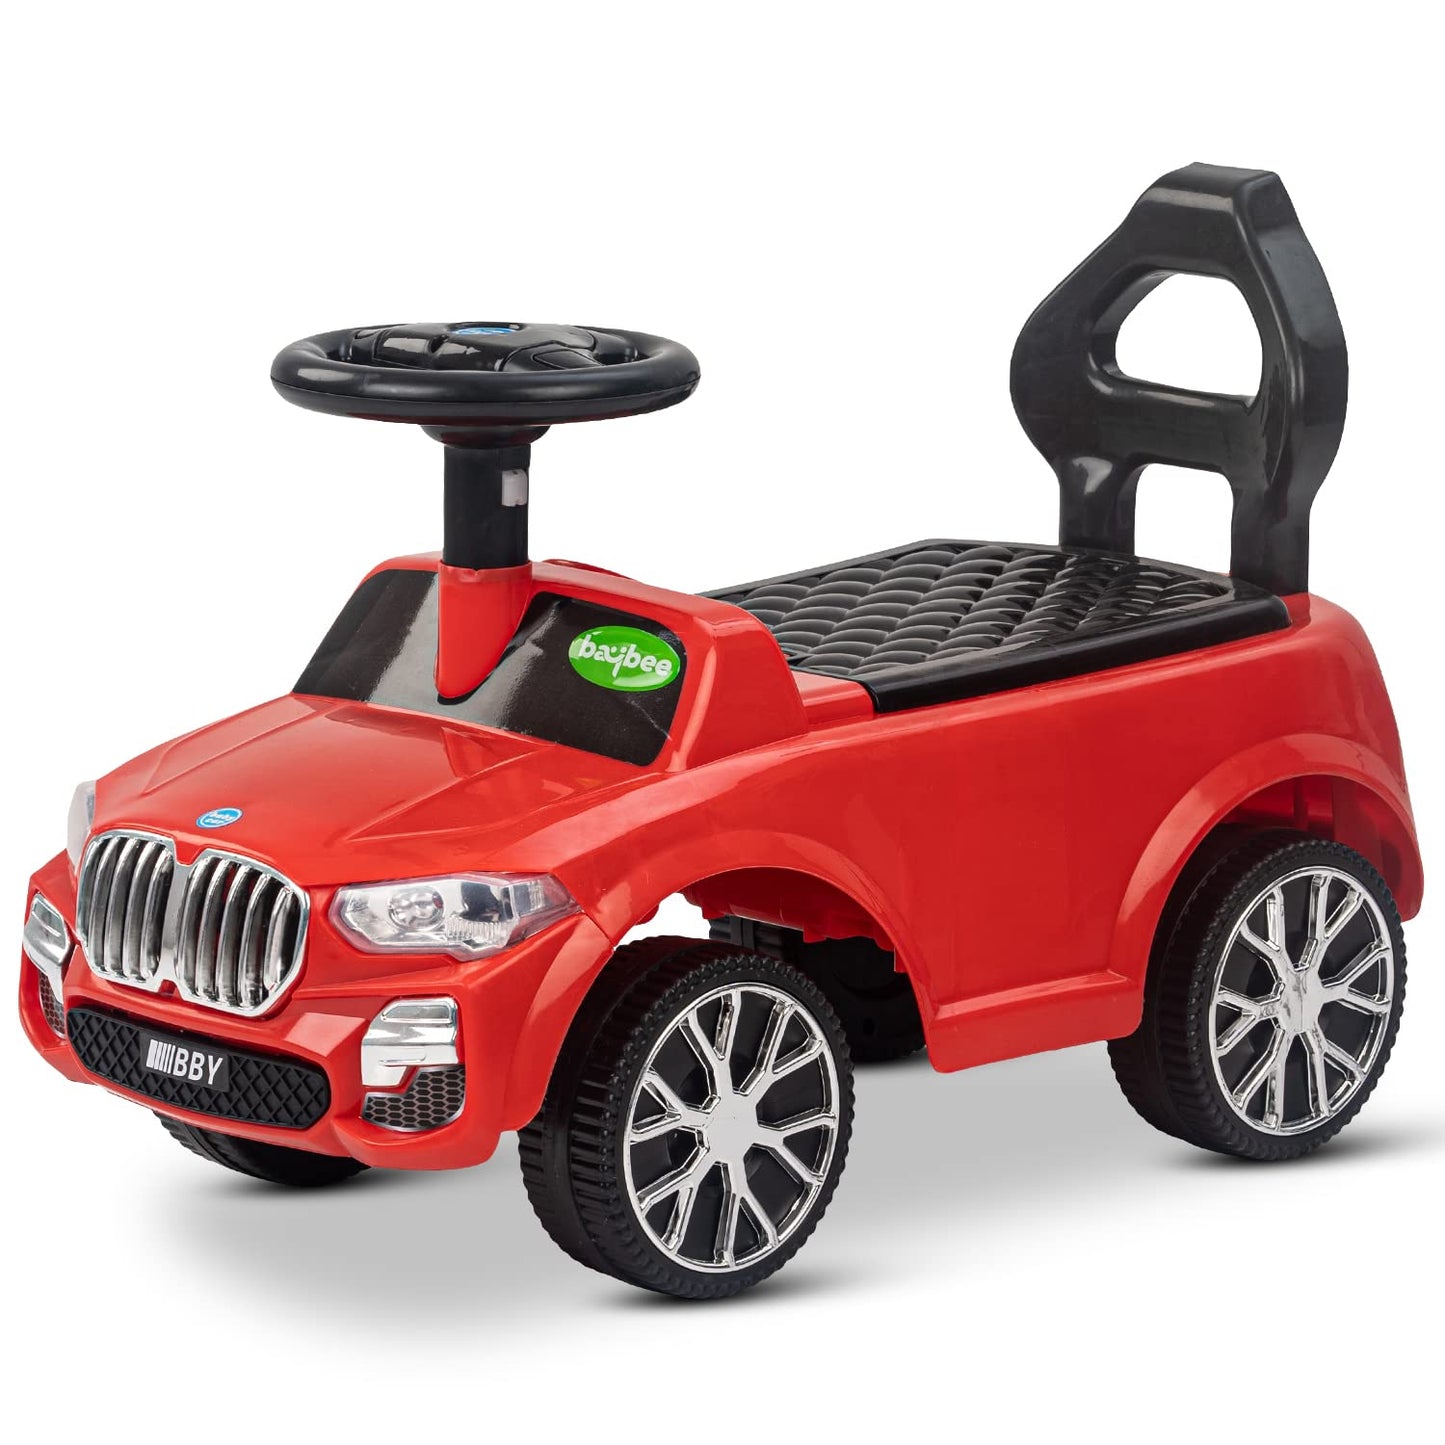 Baybee Magnus Ride on Baby Car for Kids Kids Car with Horn Button